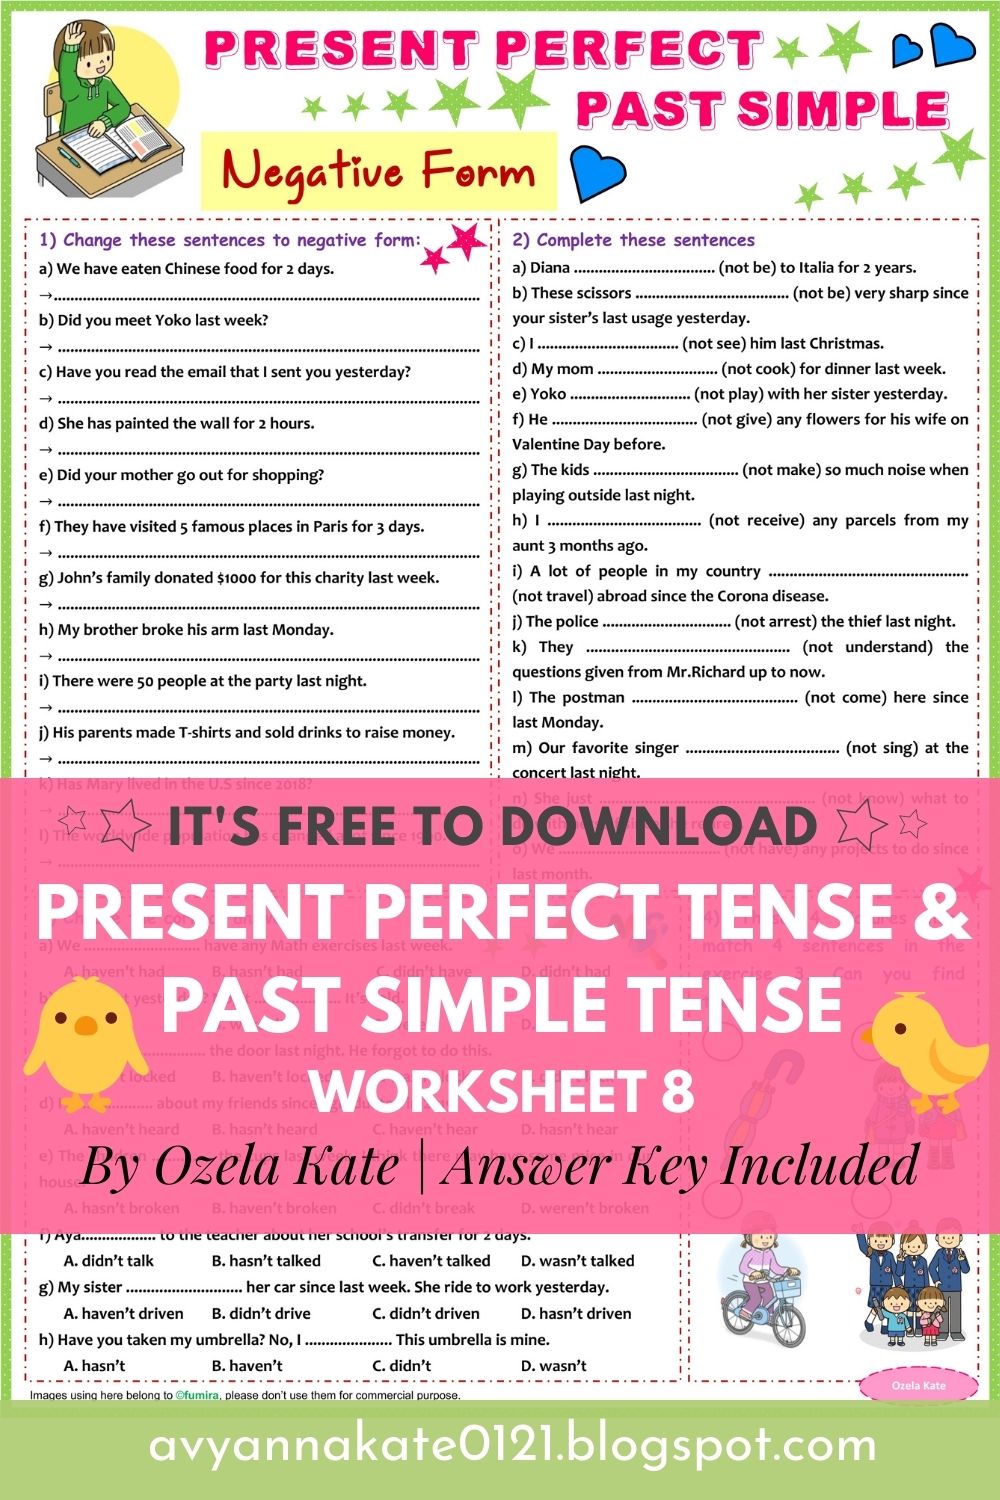 ozela-kate-worksheet-for-children-and-beginner-tenses-present-perfect-tense-and-past-simple